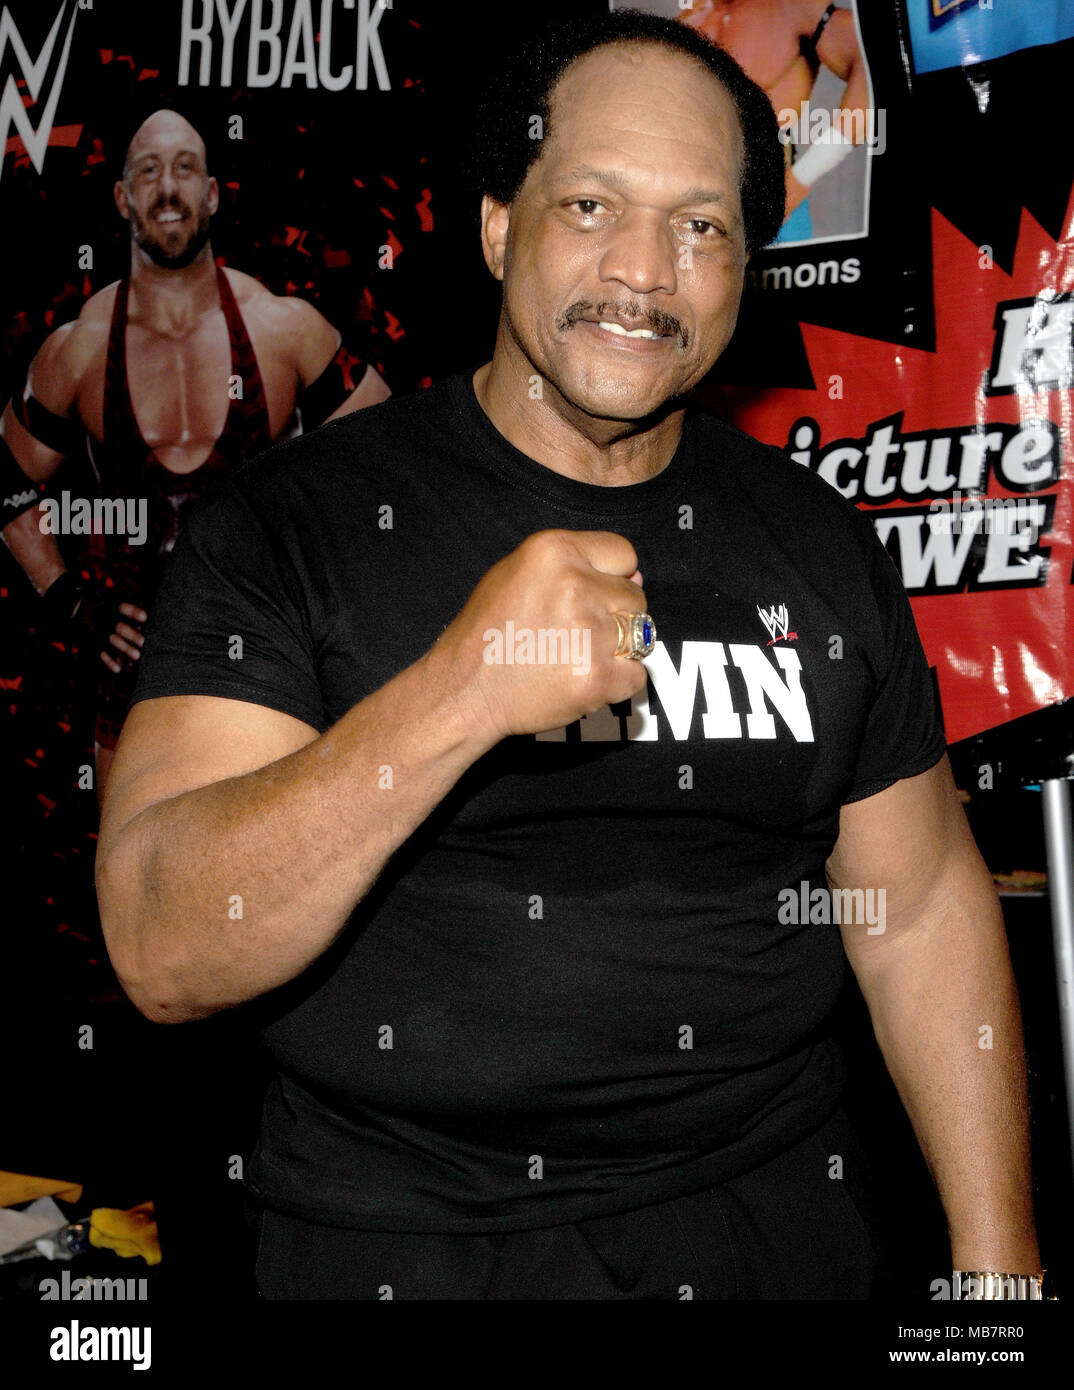 New York, NY, USA. 8th Apr, 2018. WWE Hall of Fame member Ron Simmons attends WrestleCon at the Sheraton Hotel in New Orleans in conjunction with WrestleMania 34 . Credit: George Napolitano/Media Punch/Alamy Live News Stock Photo